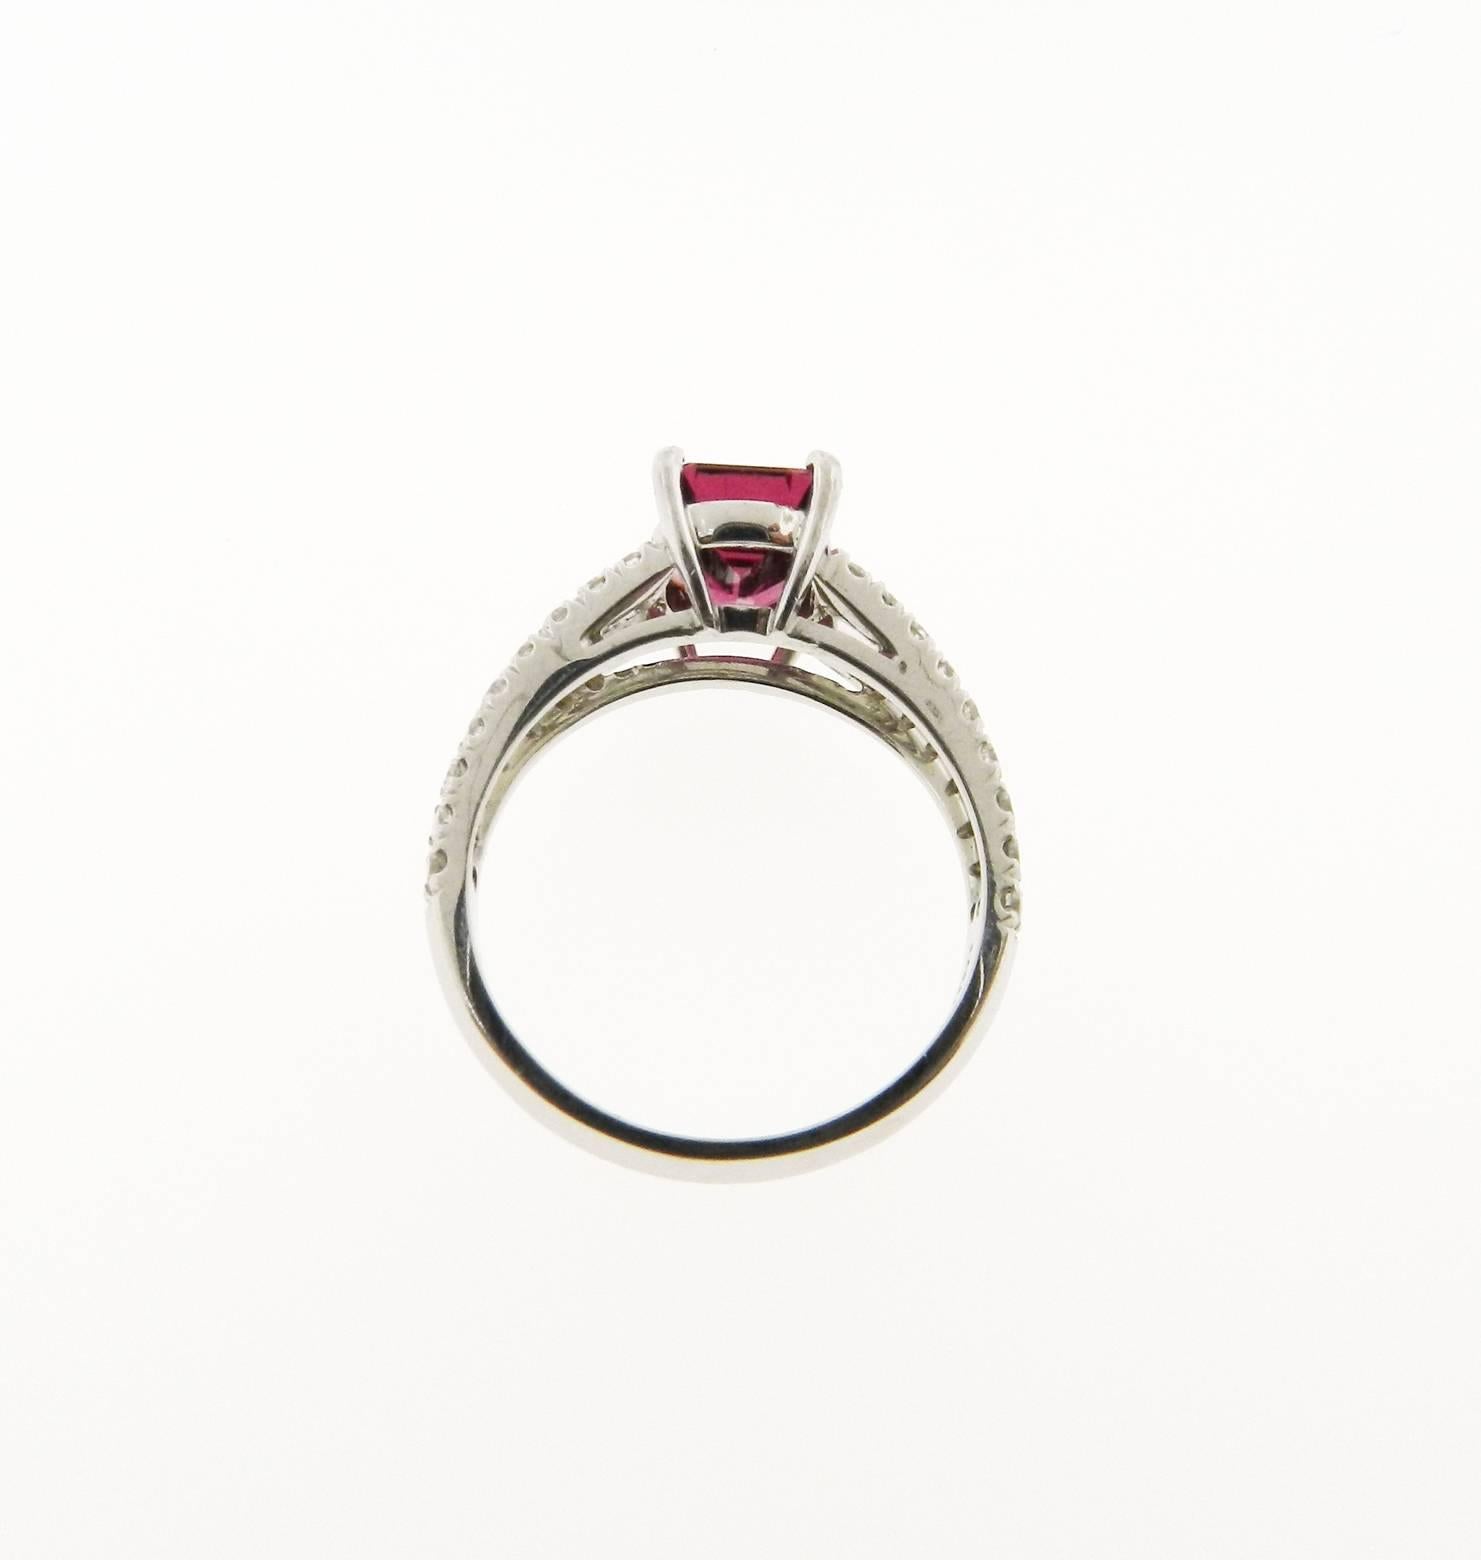 Beautiful ring, centering an emerald-cut pink tourmaline set in 18k white gold, flanked by two rows of prong-set round-cut diamonds, the weight of the pink tourmaline is approximately 1.66 carats.
Size 6.